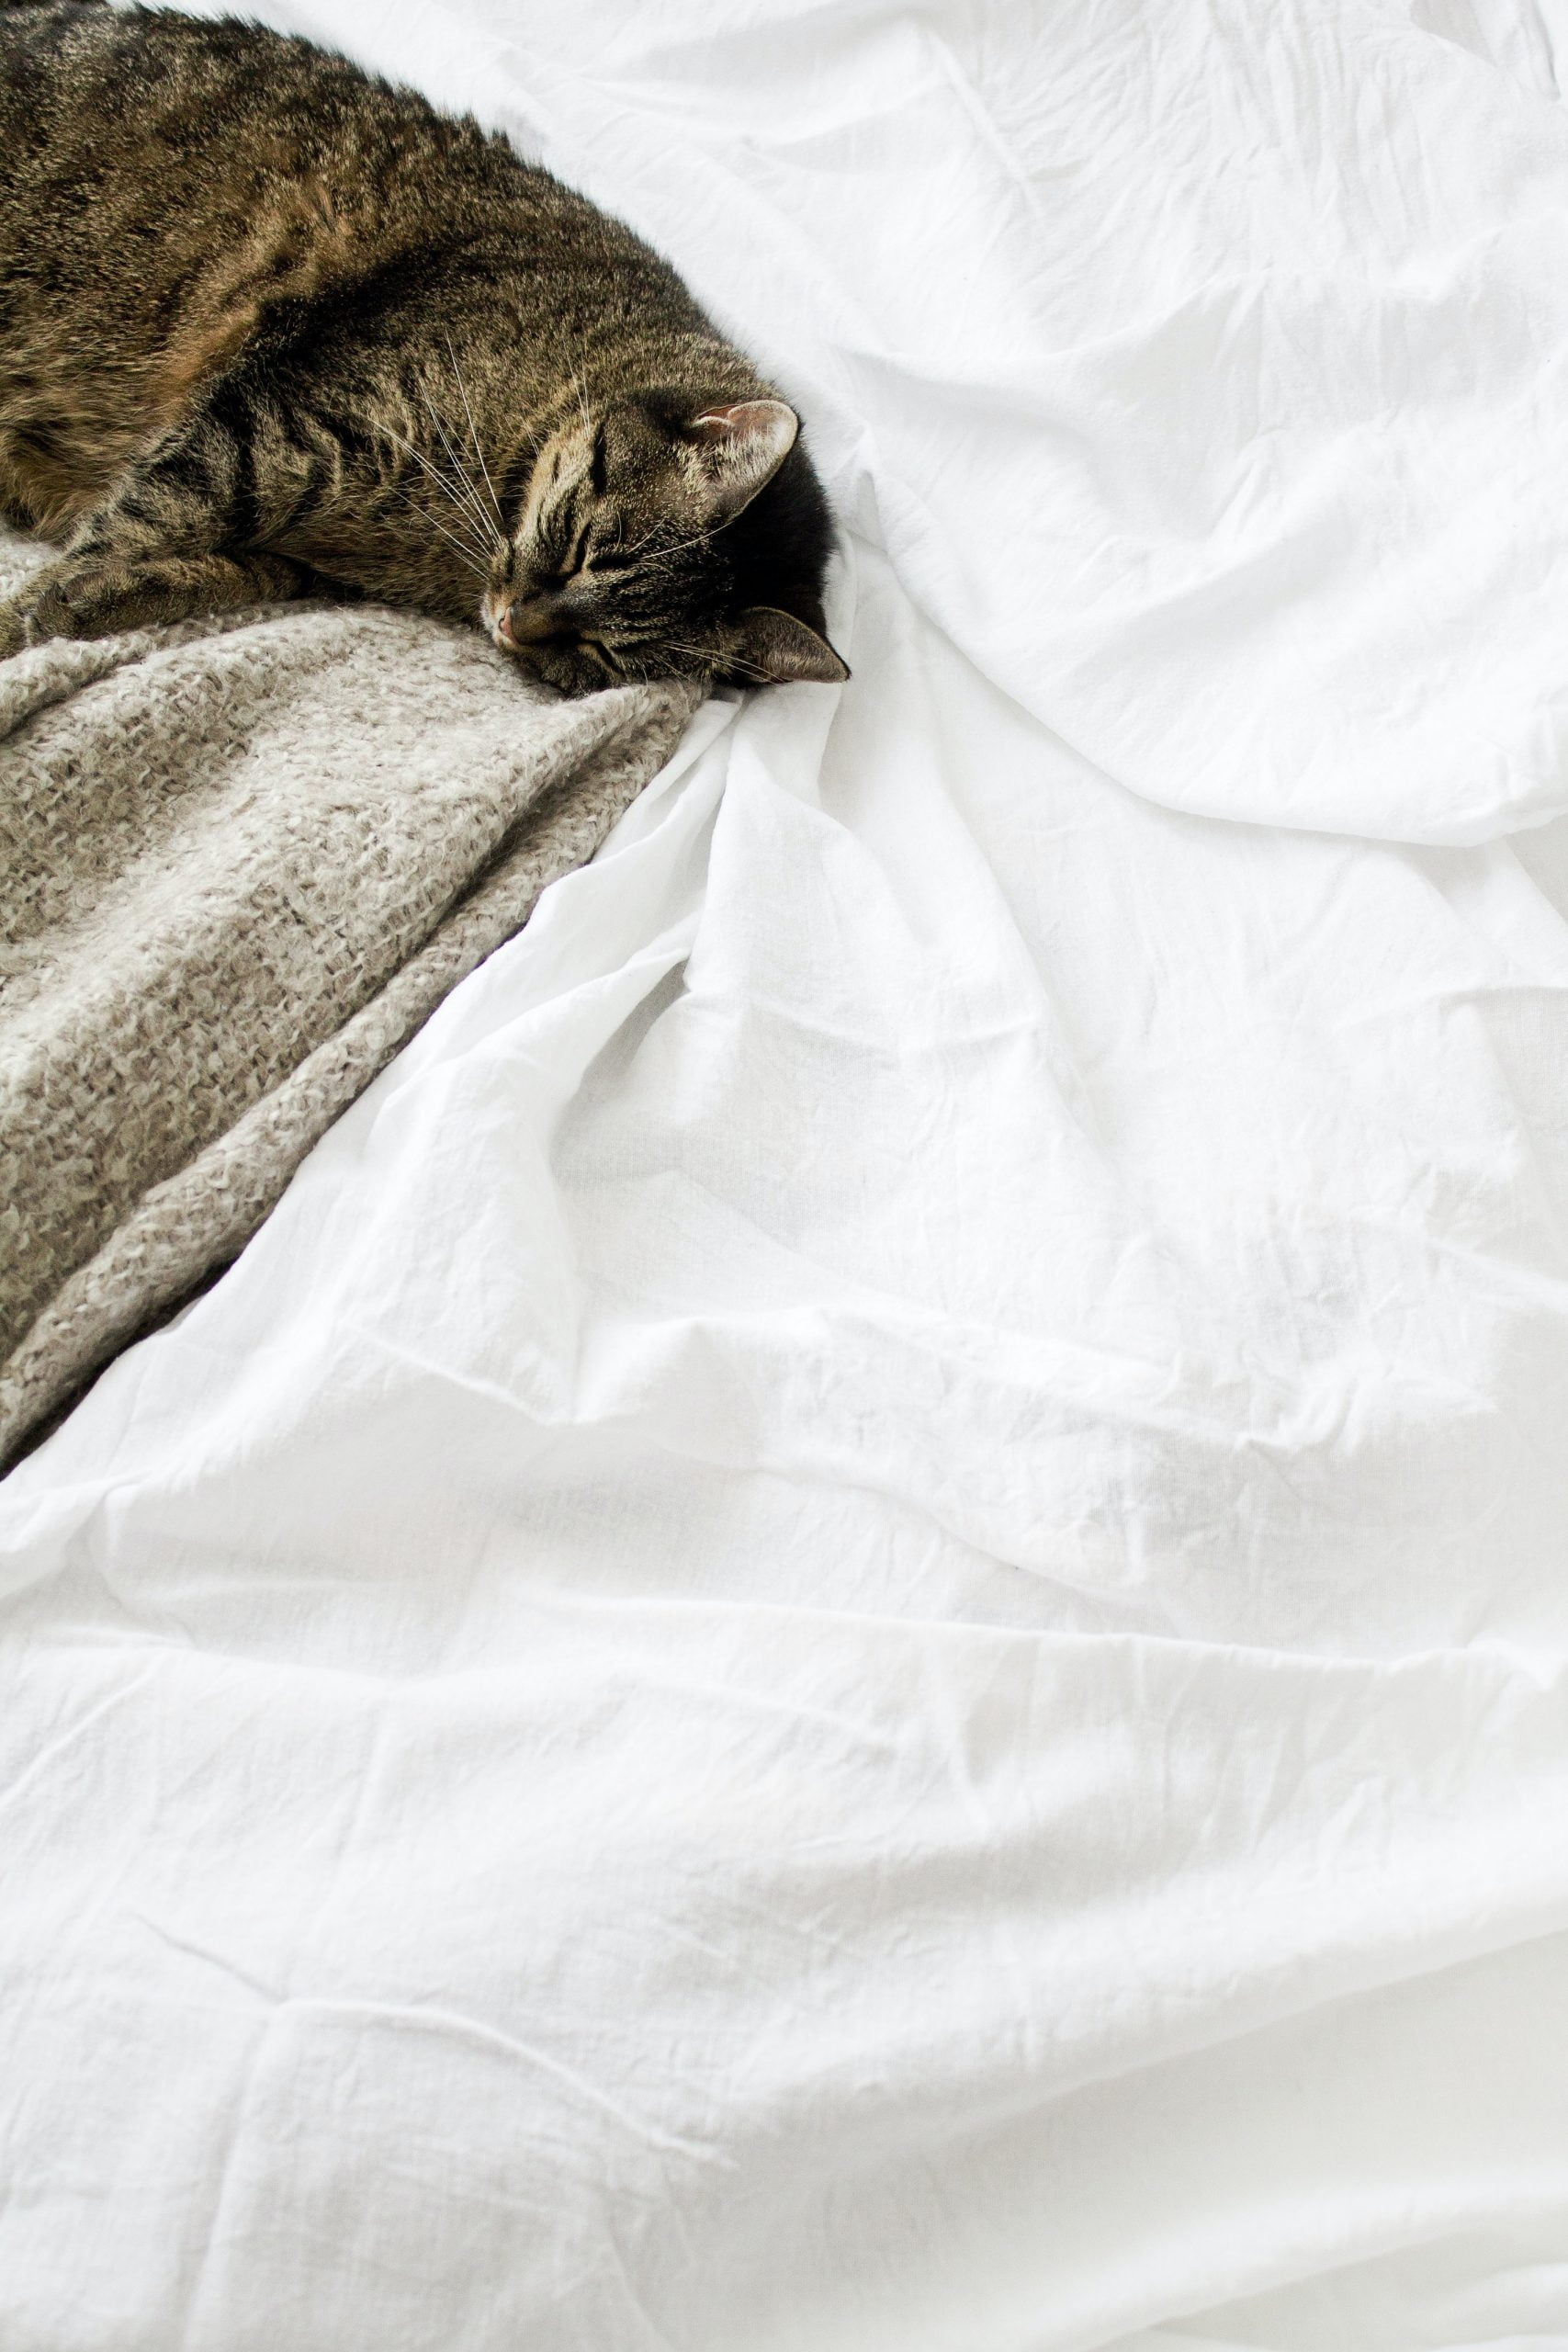 Cat on bed sheets